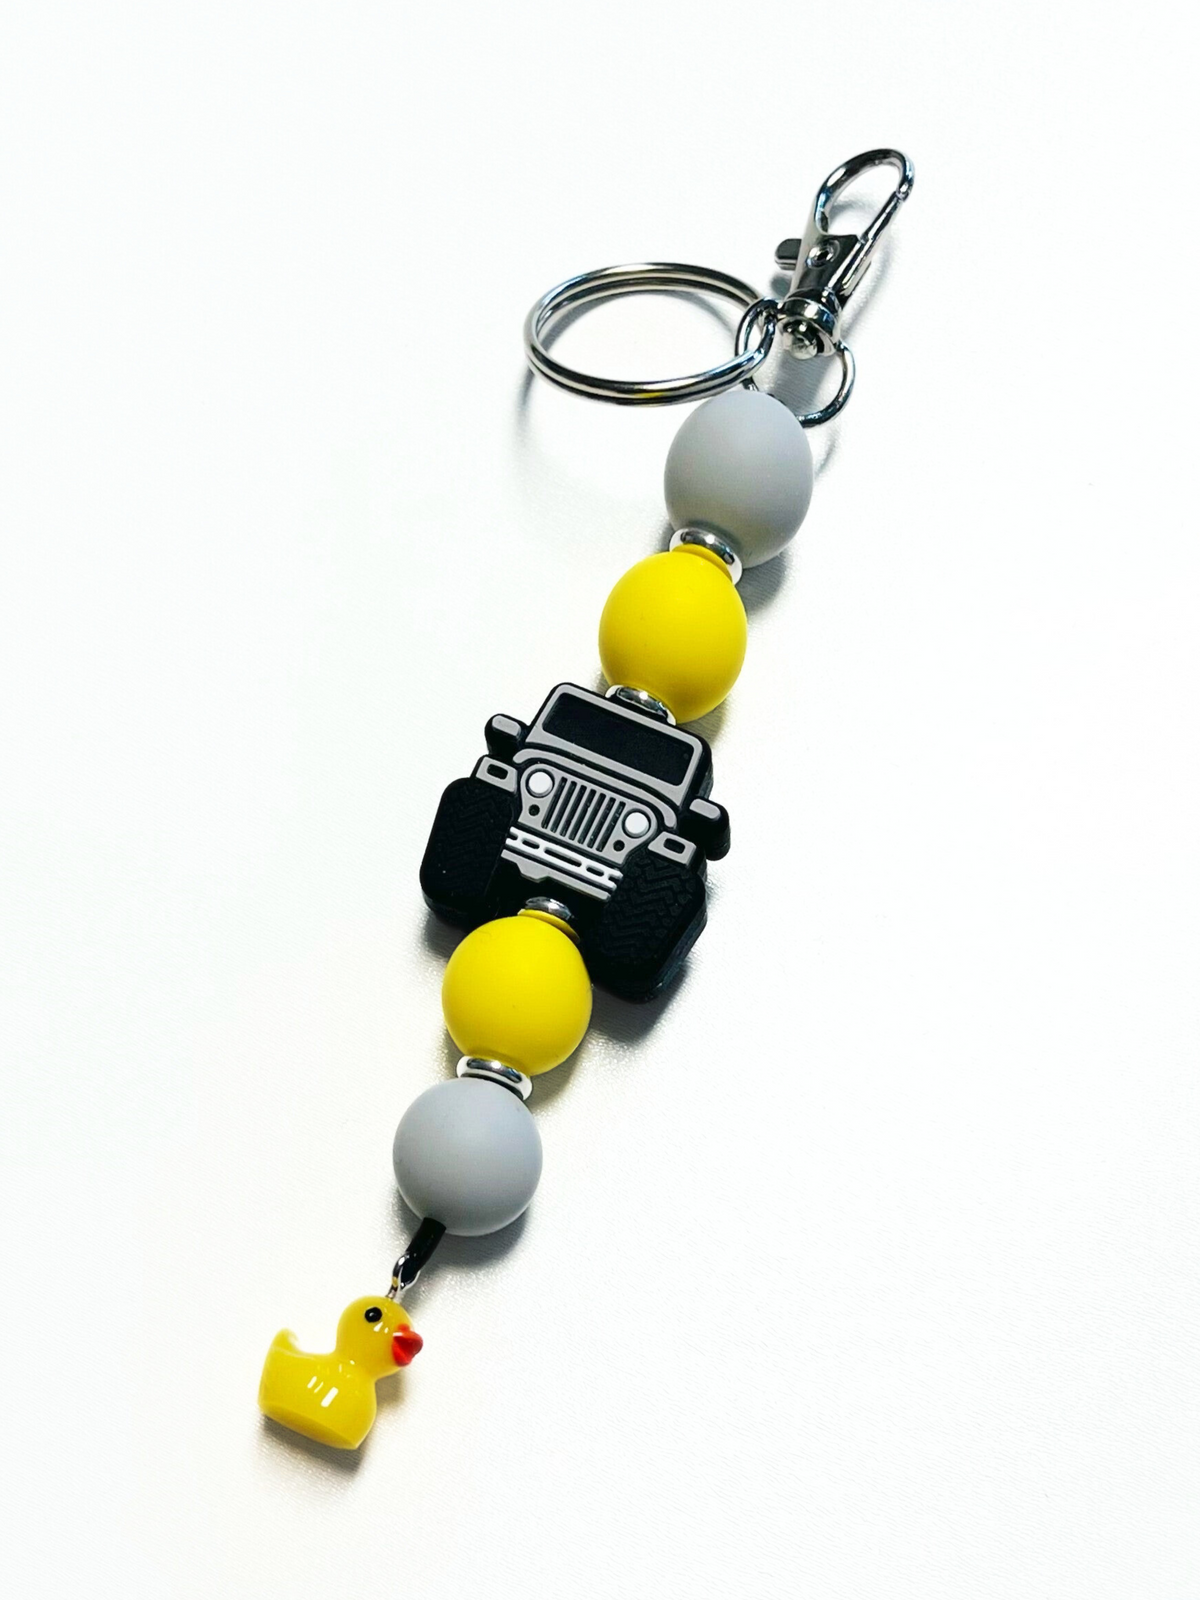 Off-road Jeep Accessory: Silicone Jeep Rubber Duck Keychain Keyring with 4x4 Jeep Adventure Silicone Focal Bead, food-grade silicone, round silicone accent beads in yellow and grey, lobster claw clasp, quick release swivel hook, split keyring.